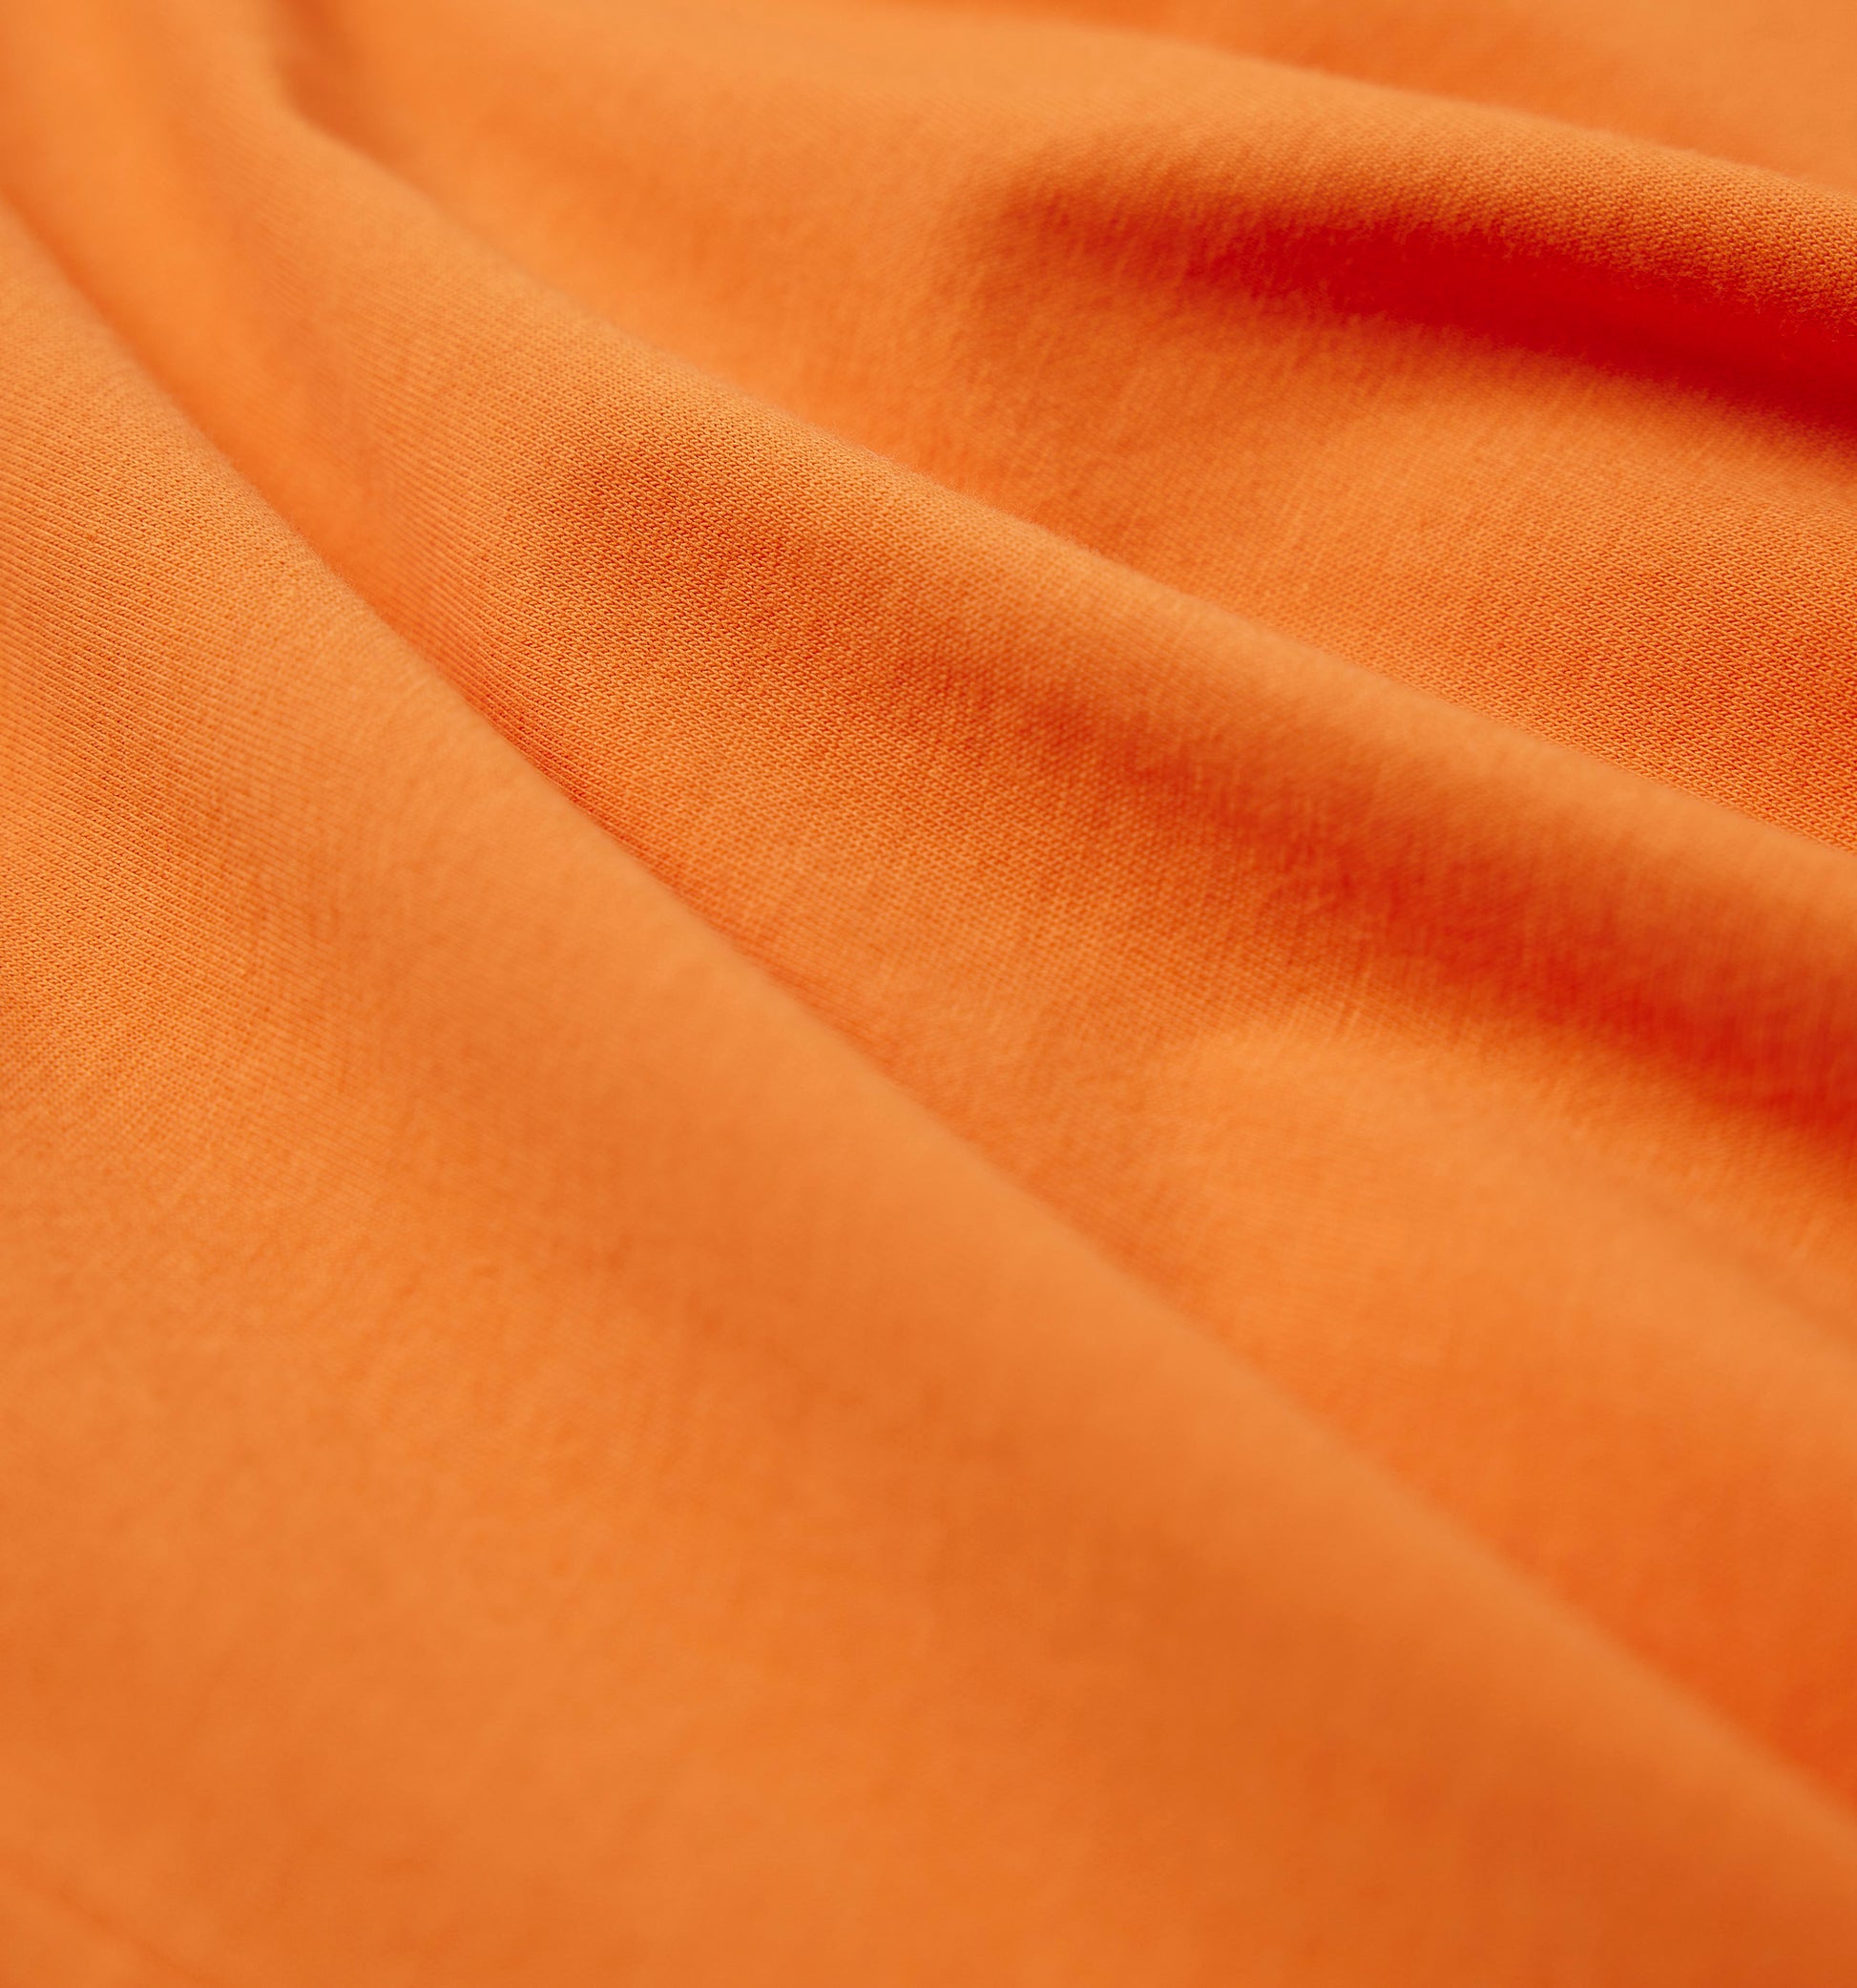 The Steve - Basic Cotton T-shirt In Orange From King Essentials